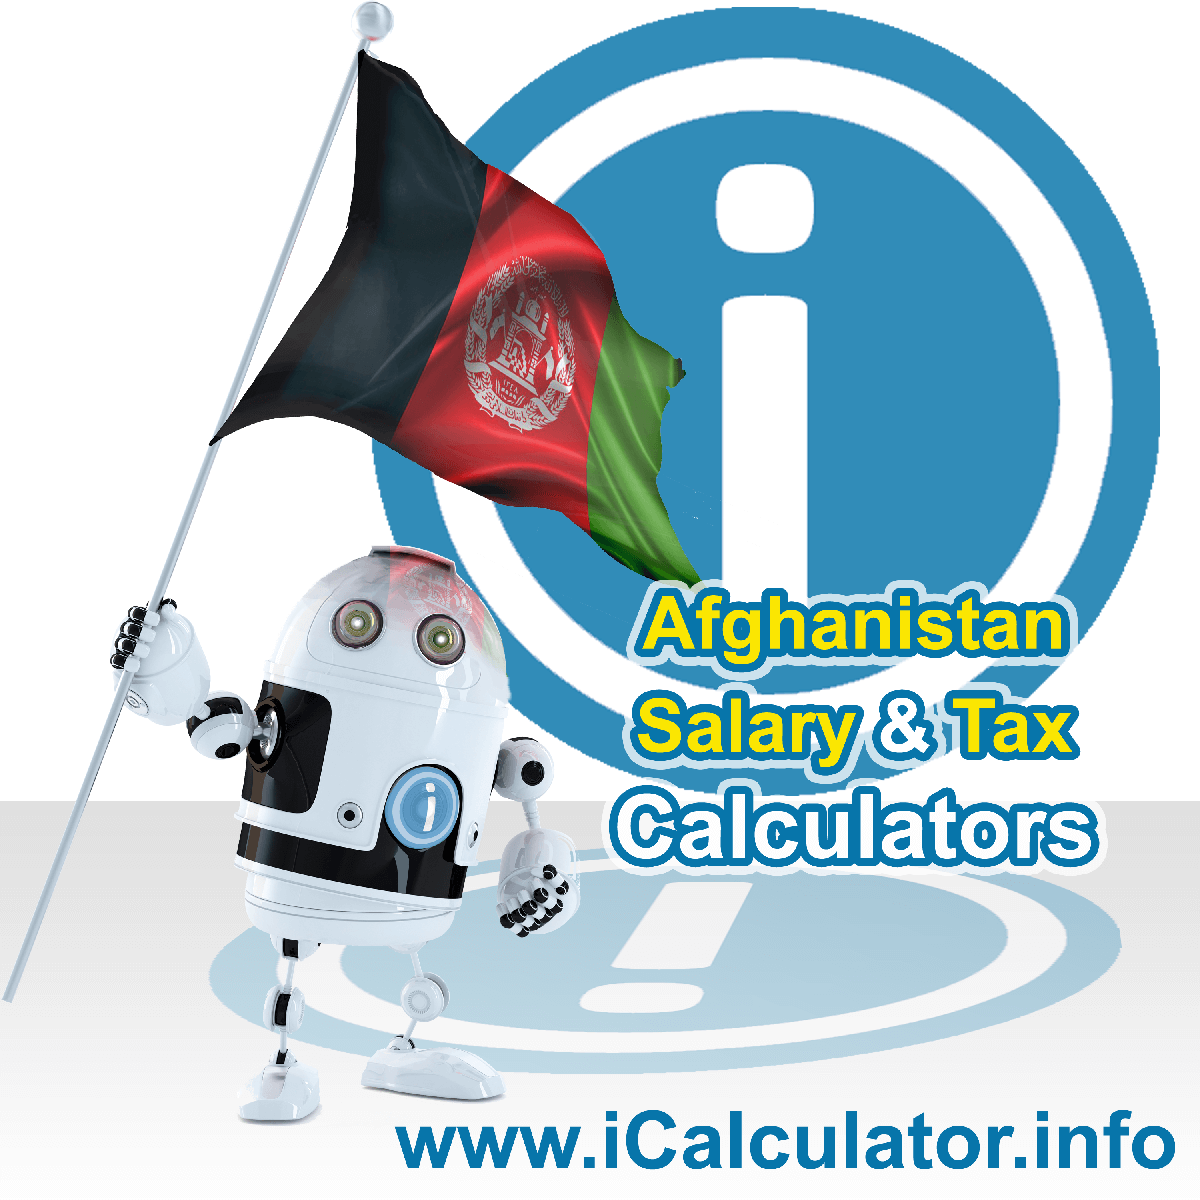 Afghanistan Wage Calculator. This image shows the Afghanistan flag and information relating to the tax formula for the Afghanistan Tax Calculator